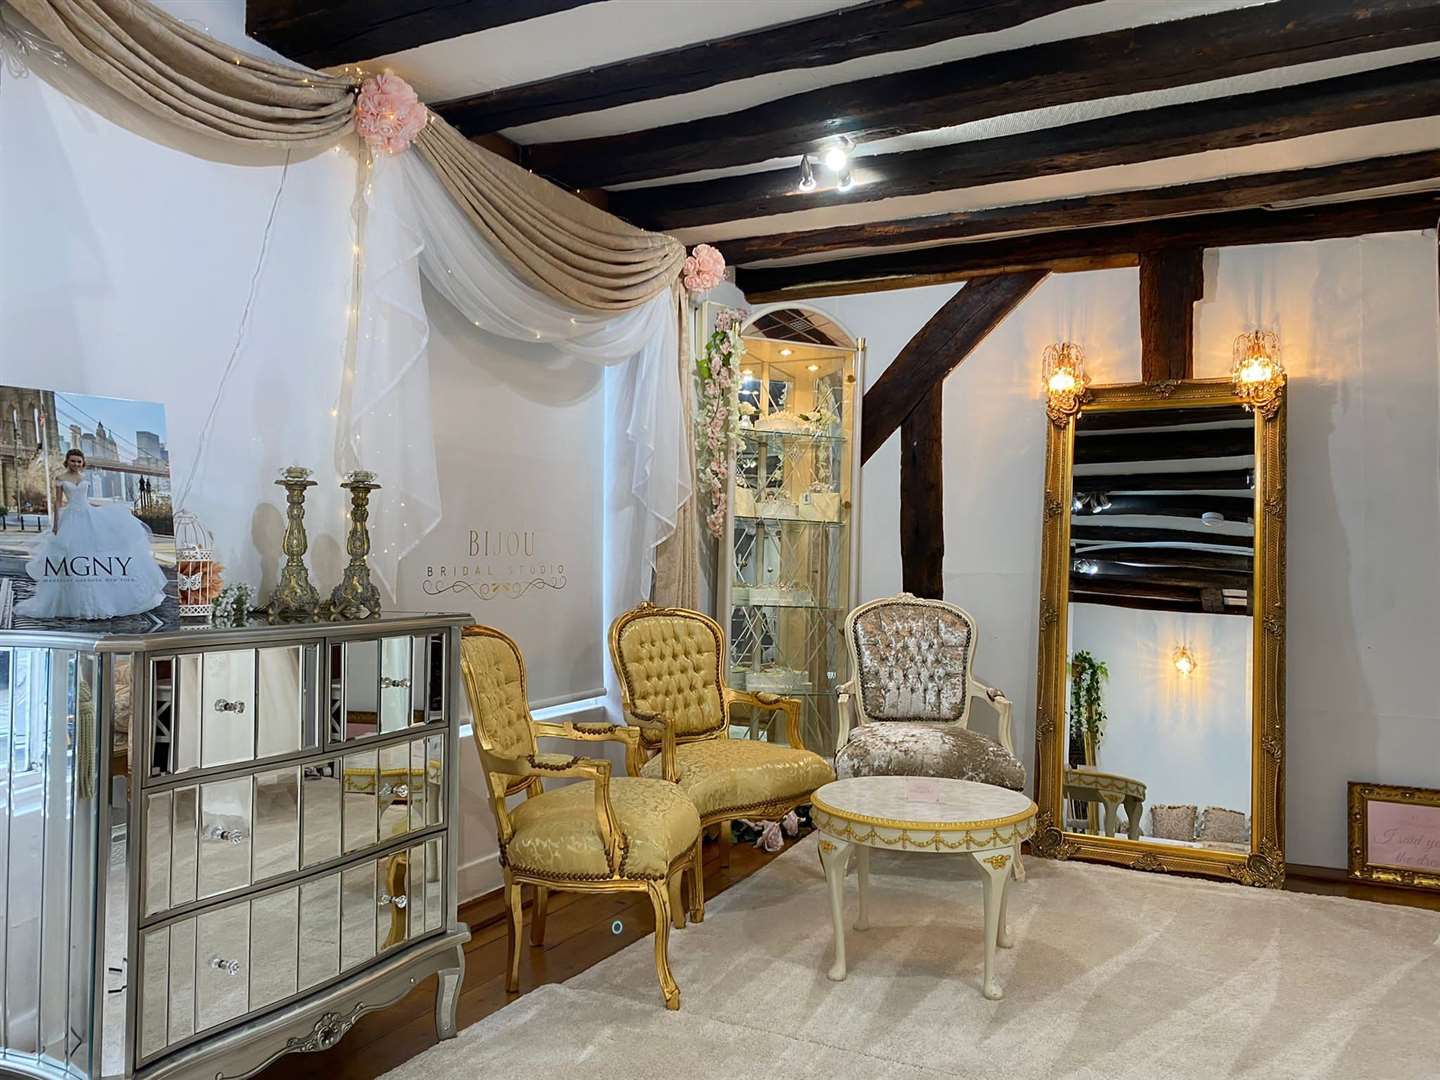 Inside the new Bijou Bridal Studio which is located above The Salon in Market Street, Sandwich